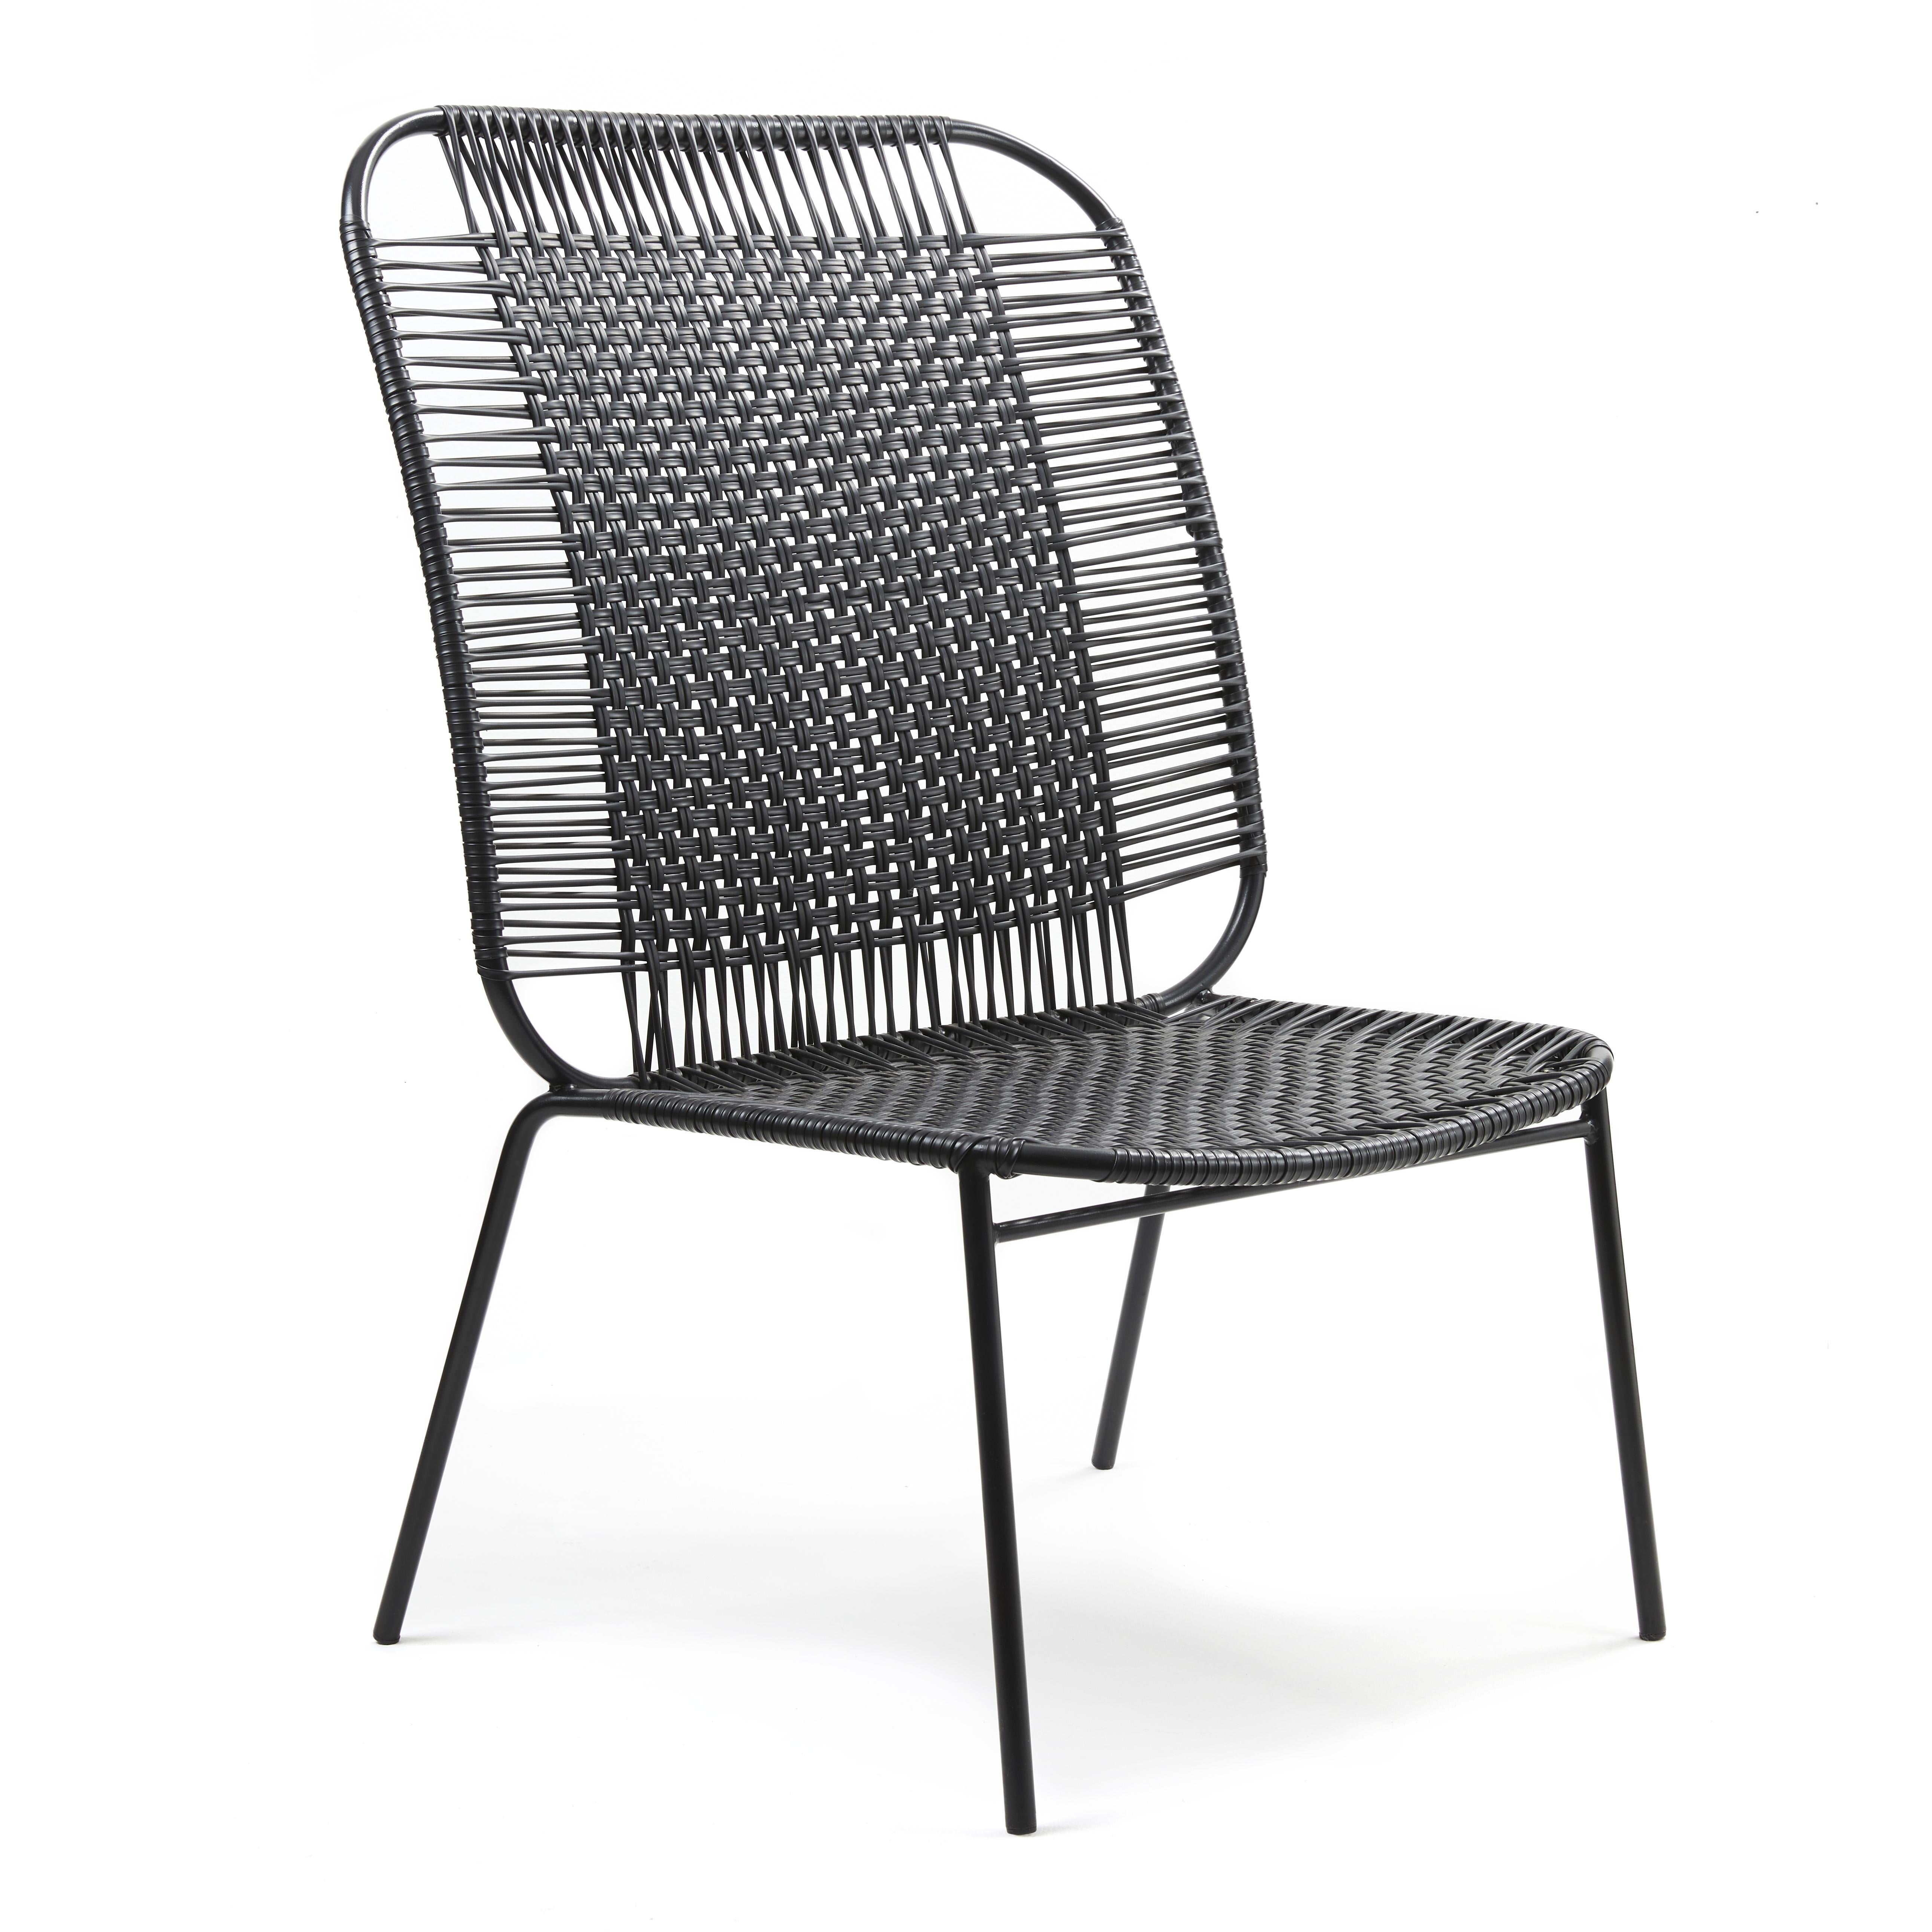 Set of 2 black Cielo lounge high chair by Sebastian Herkner.
Materials: galvanized and powder-coated tubular steel. PVC strings are made from recycled plastic.
Technique: made from recycled plastic and weaved by local craftspeople in Cartagena,